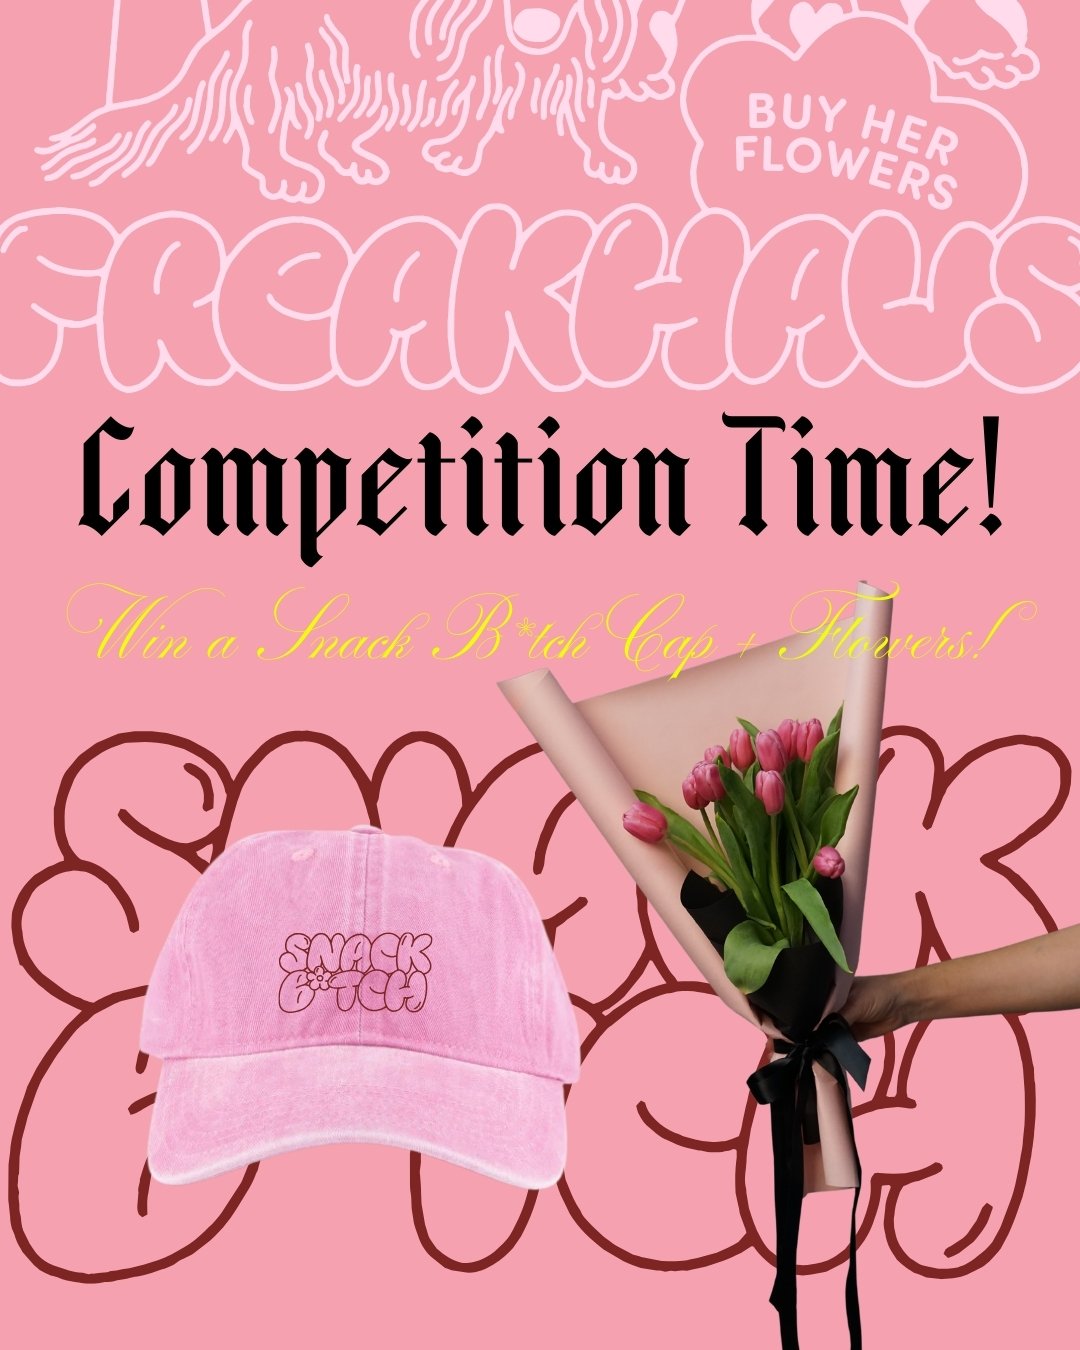 MOTHER'S DAY COMPETITION TIME! 

If you are anything like me and have some neuro-spicy days,  sometimes all it takes is a few coloured pencils and cute drawings to get us to wind down! 

So, here is your chance to unleash your creativity for a chance